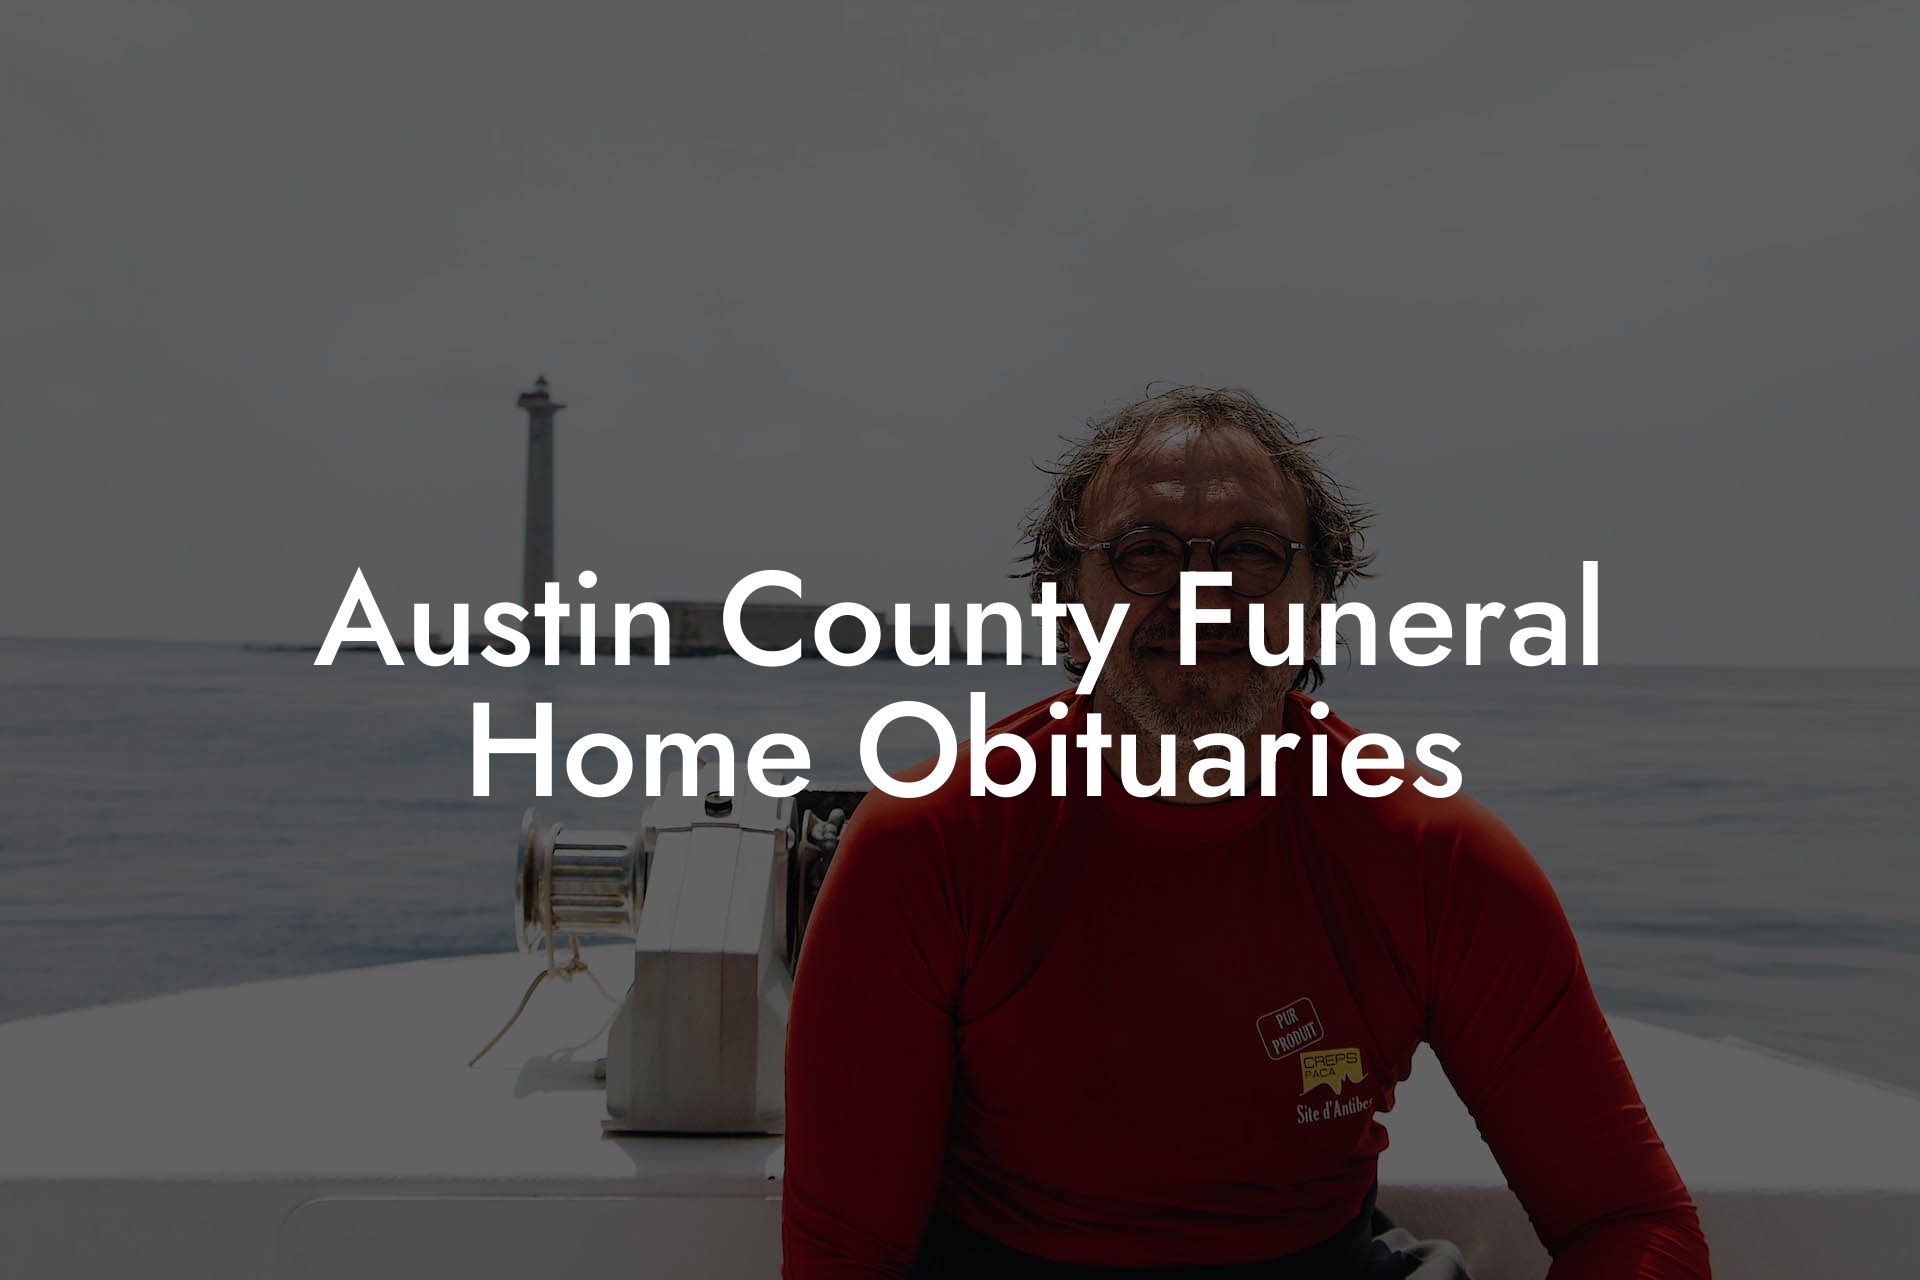 Austin County Funeral Home Obituaries